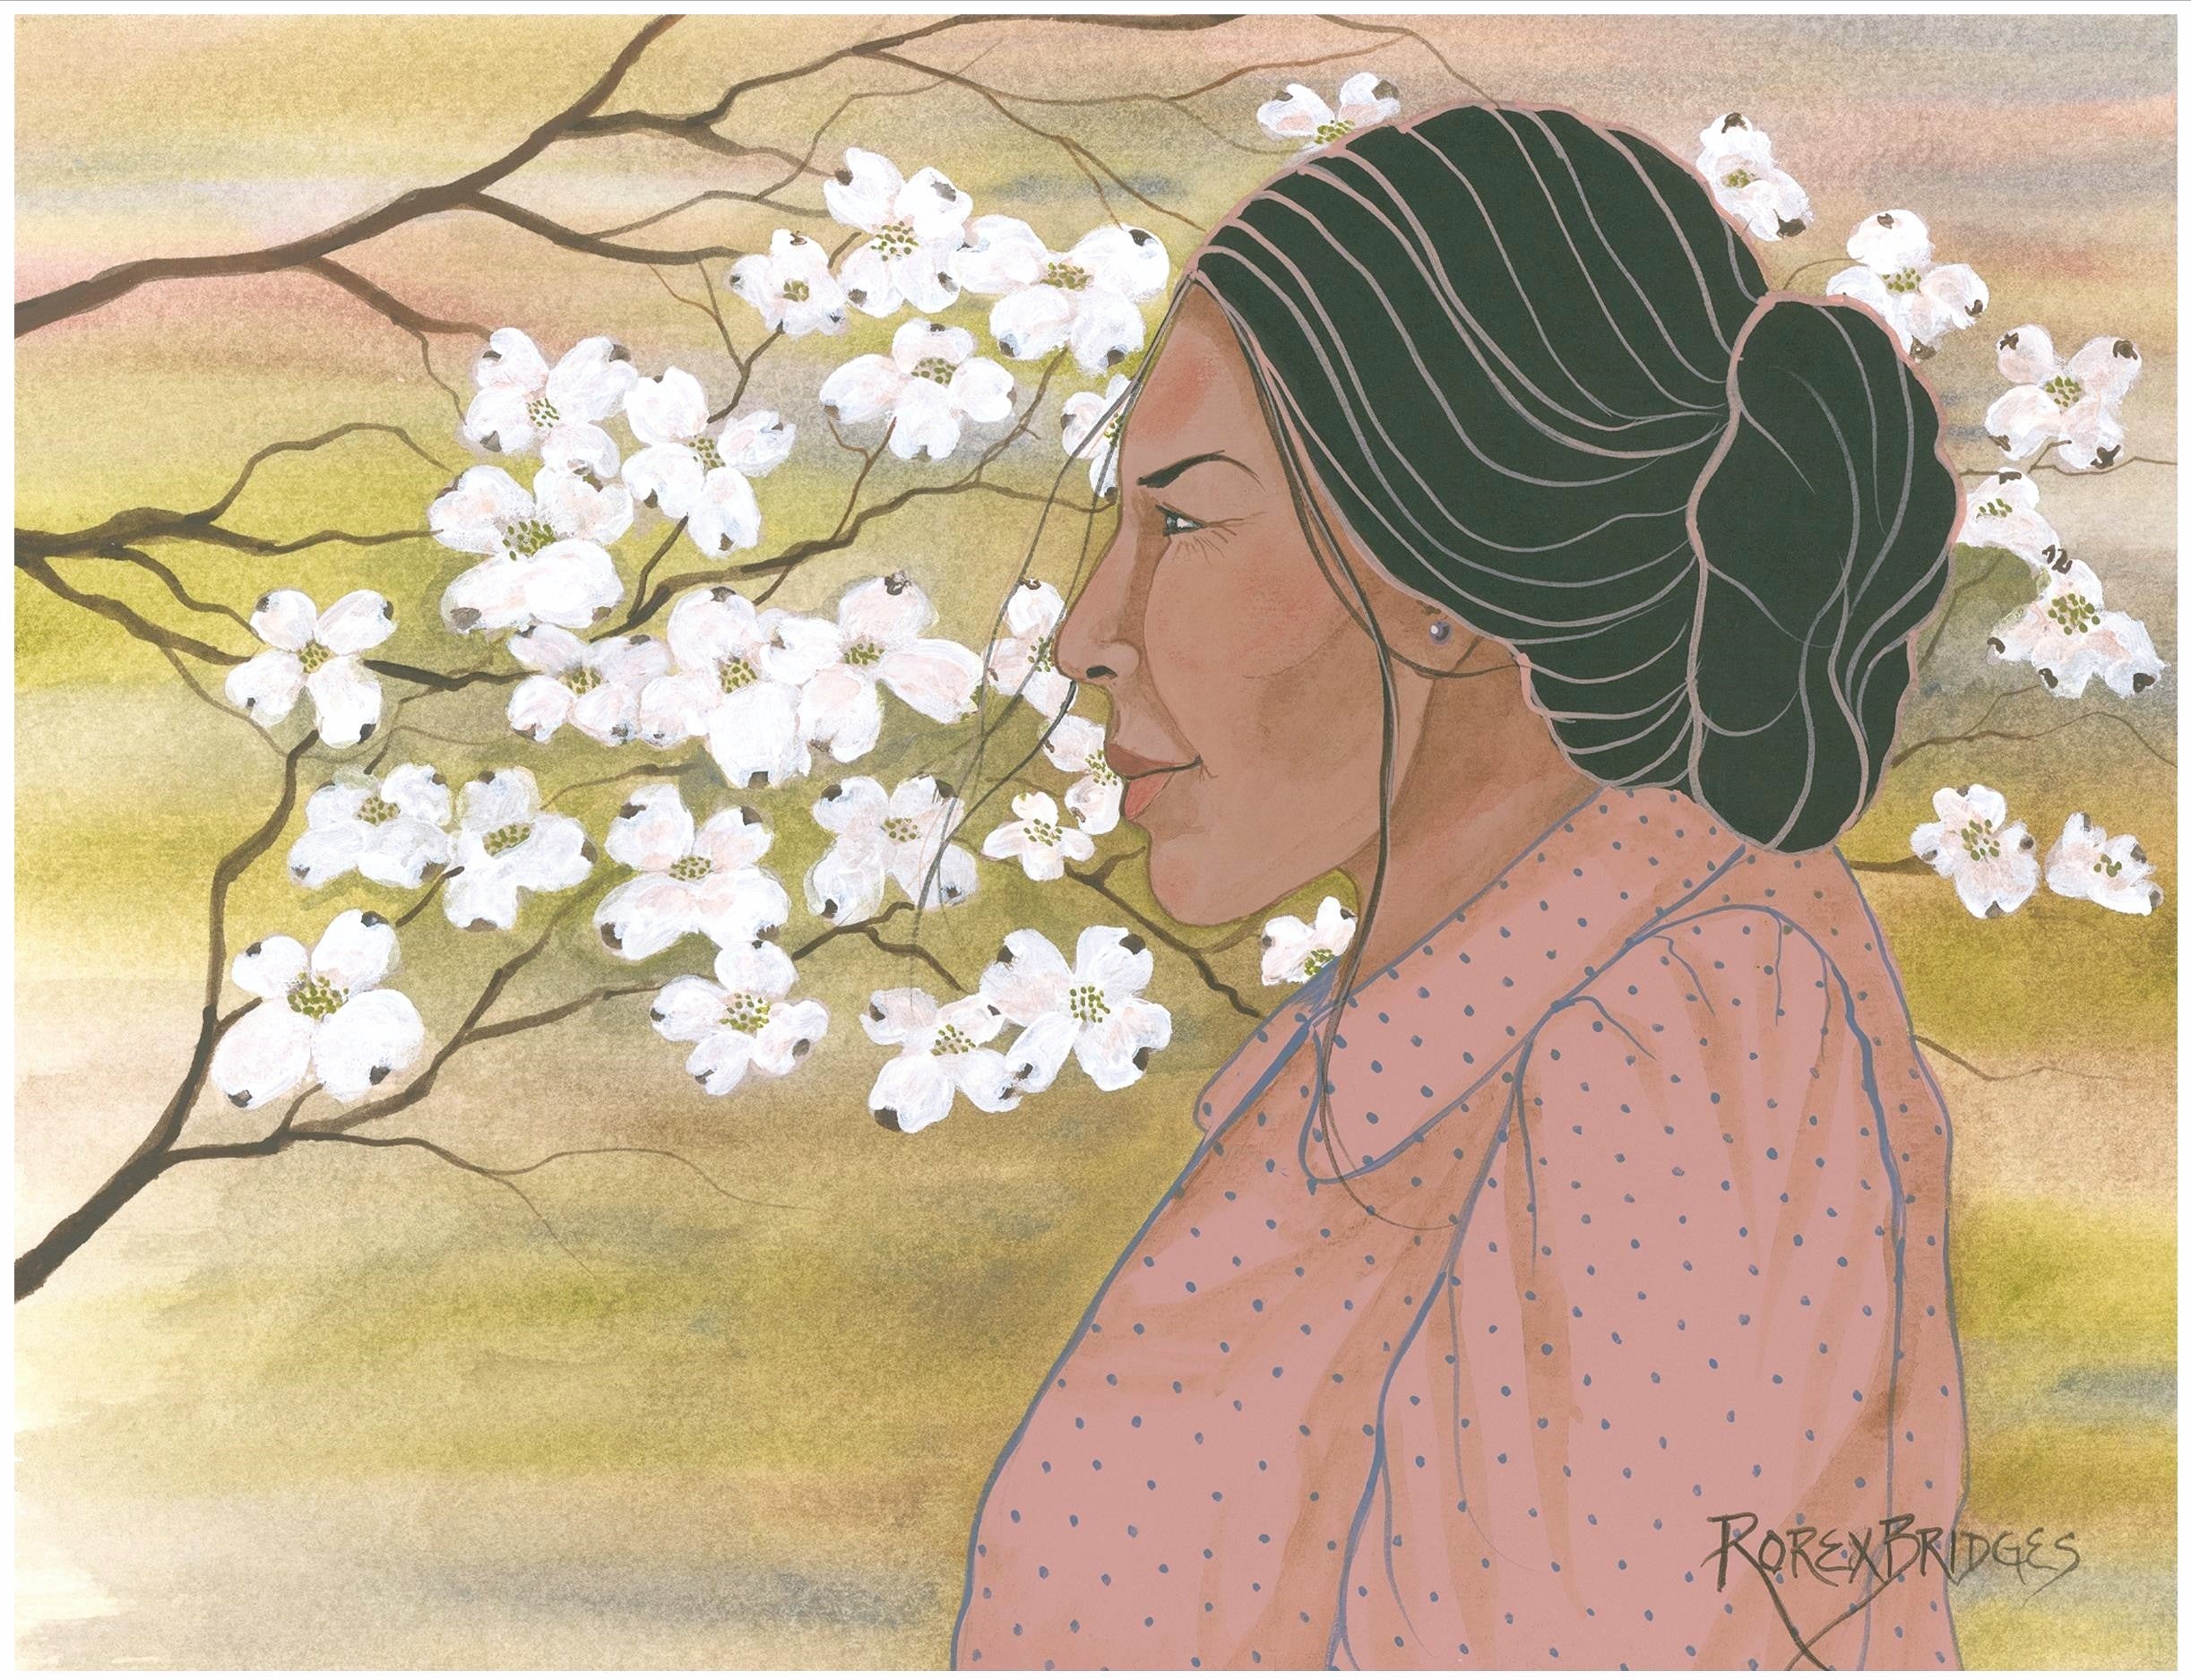 DOGWOOD BLOOMS INDIAN WOMAN